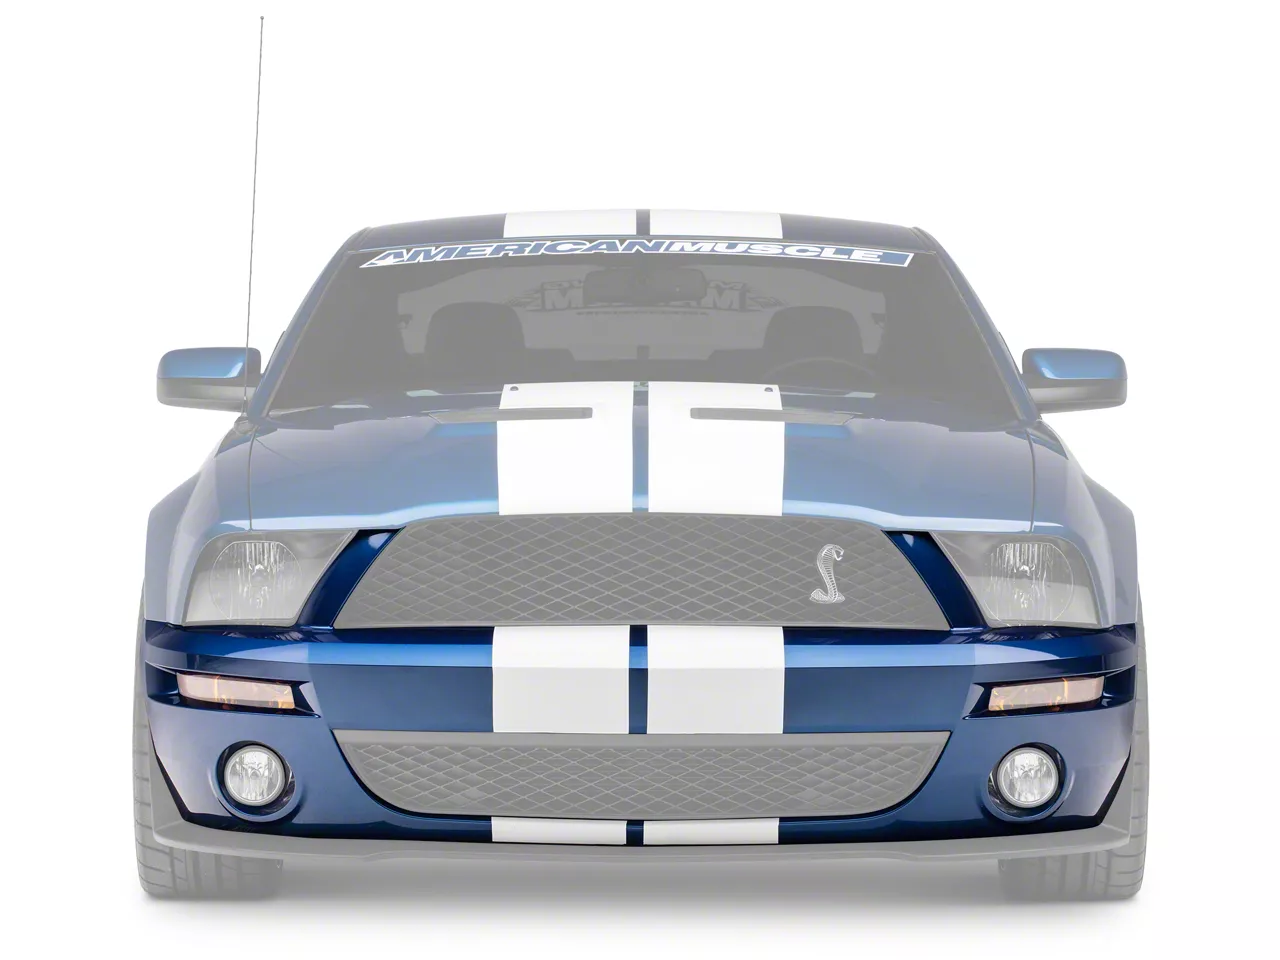 Bumper and Hood Clear Bra for Ford Mustang Gt 500 2008-2009